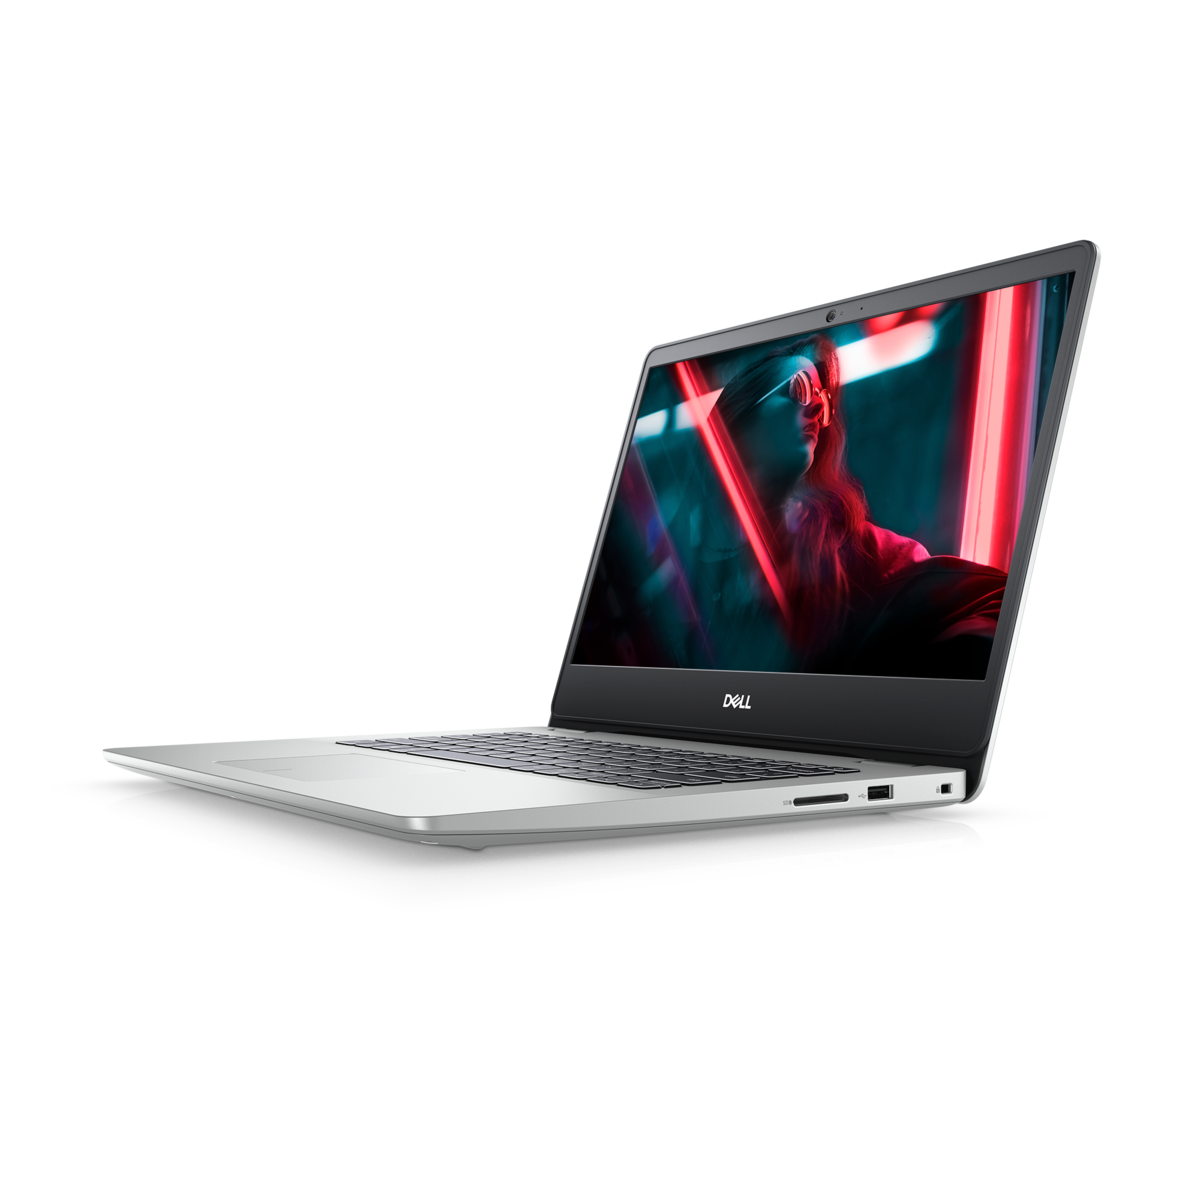 Affordable Dell Inspiron 13, 14, and 15 5000 series refreshed with